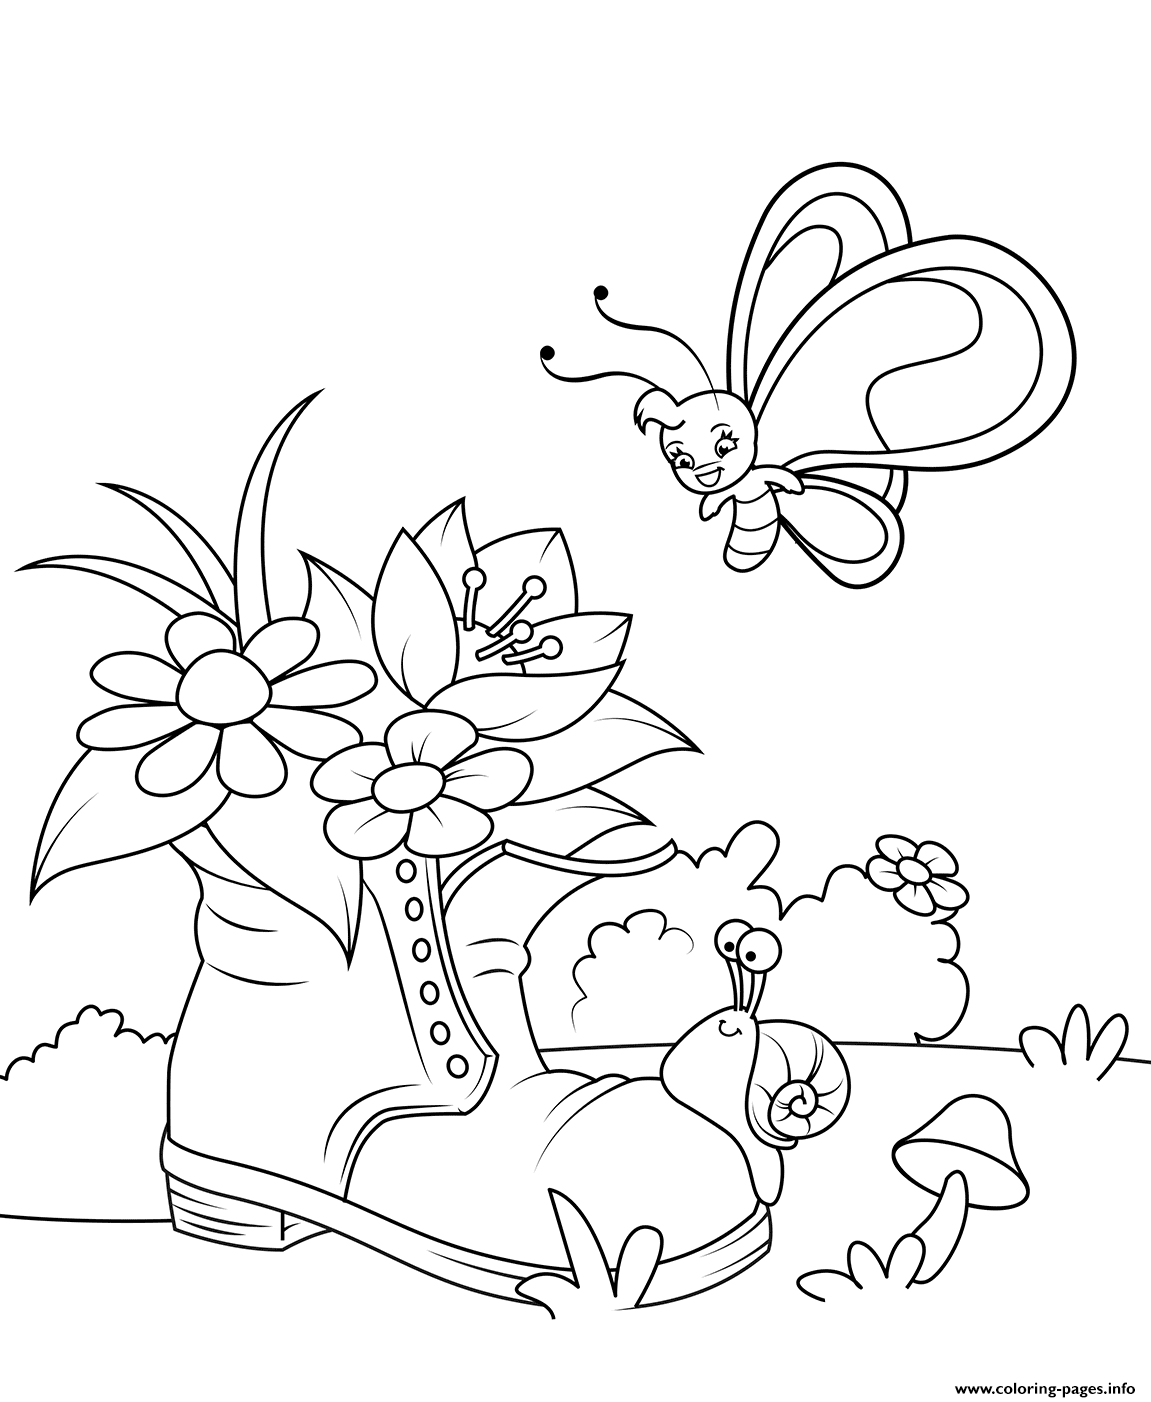 A Snail A Butterfly And A Blossoming Shoe coloring